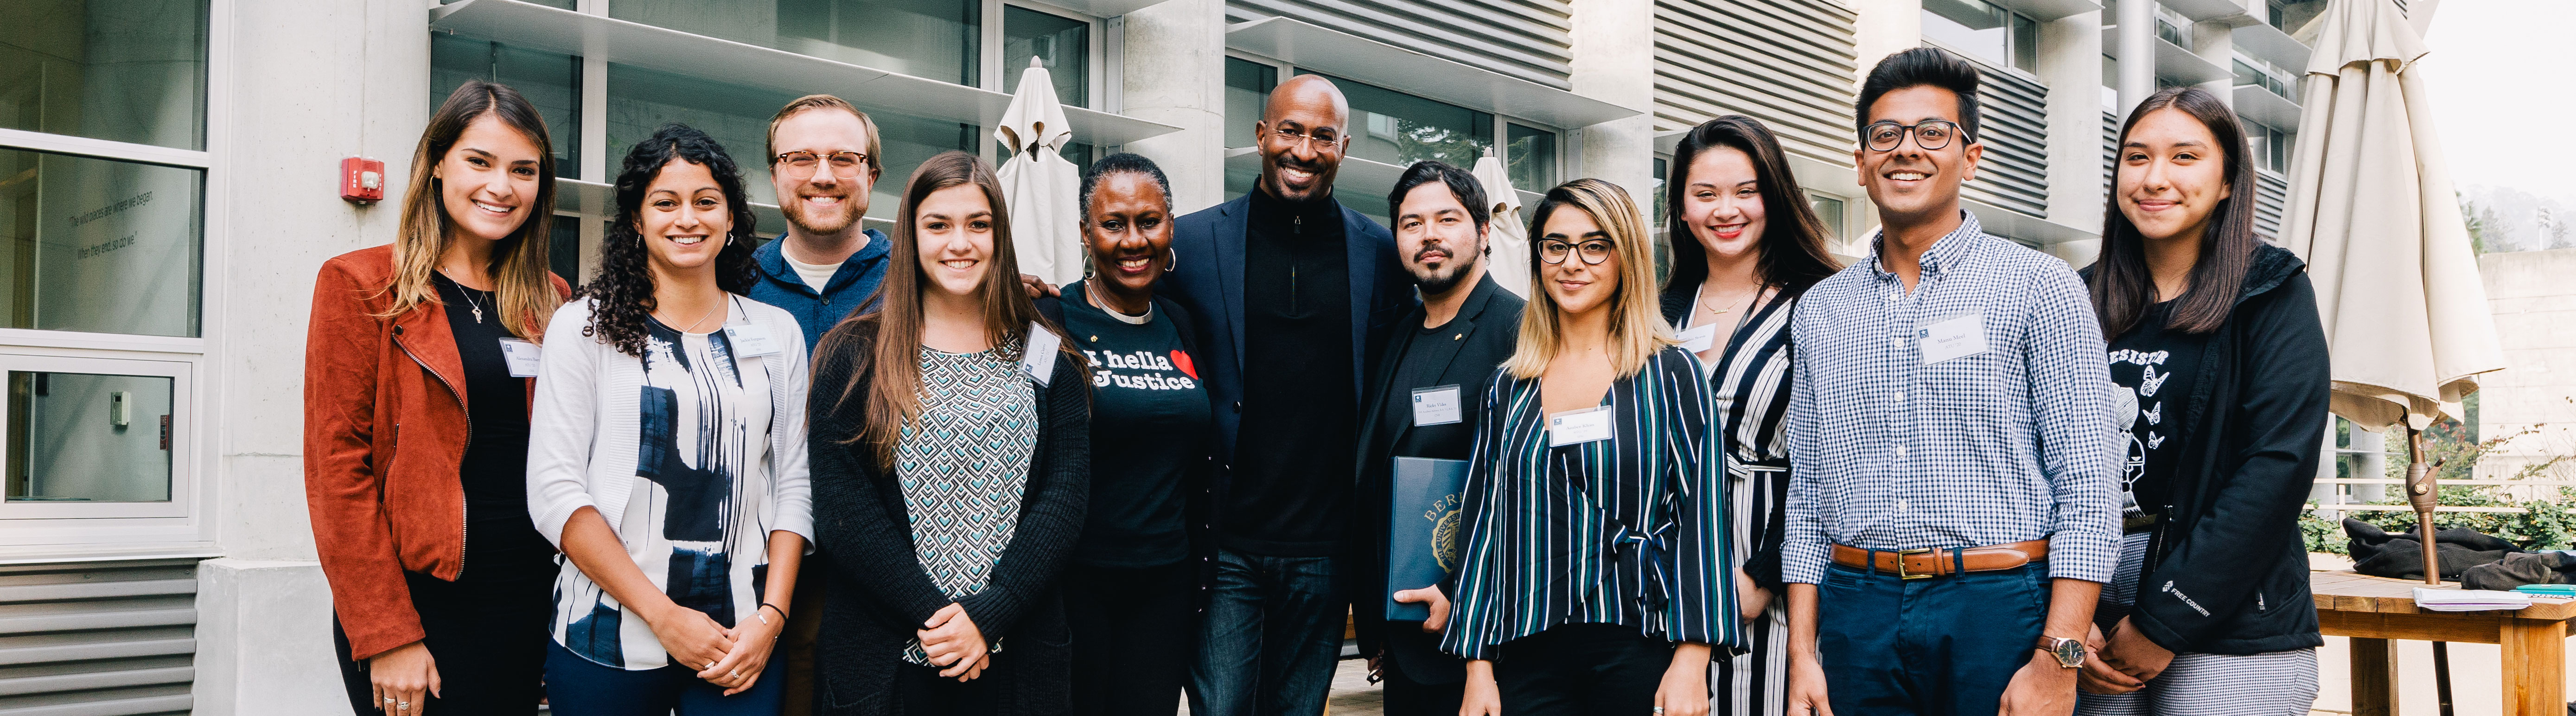 Van Jones with a group of students from the College of Natural Resources at UC Berkeley